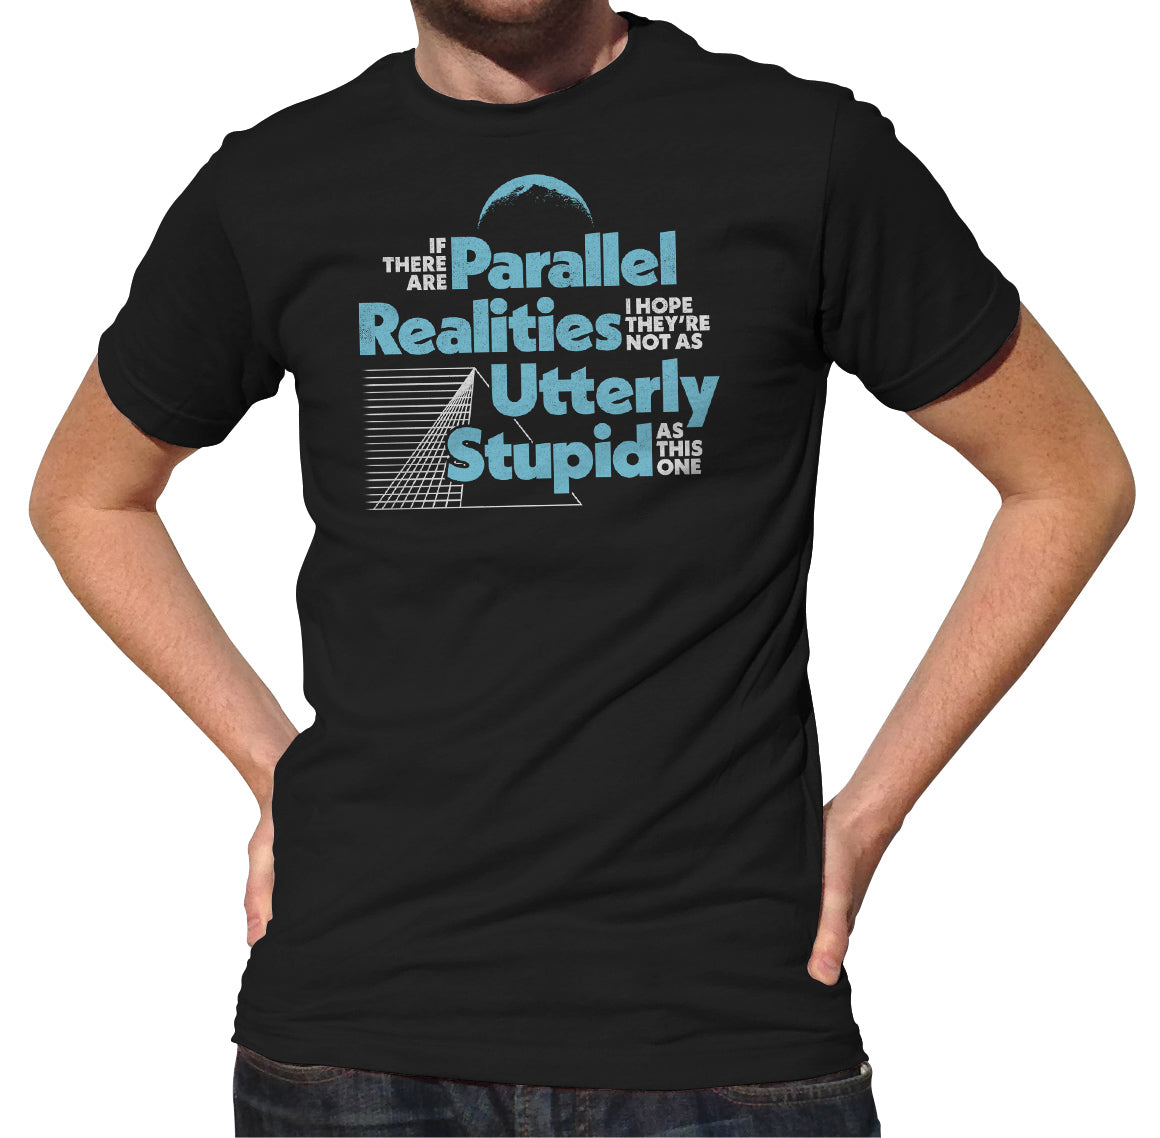 Men's If There Are Parallel Realities I Hope They're Not As Utterly Stupid As This One T-Shirt